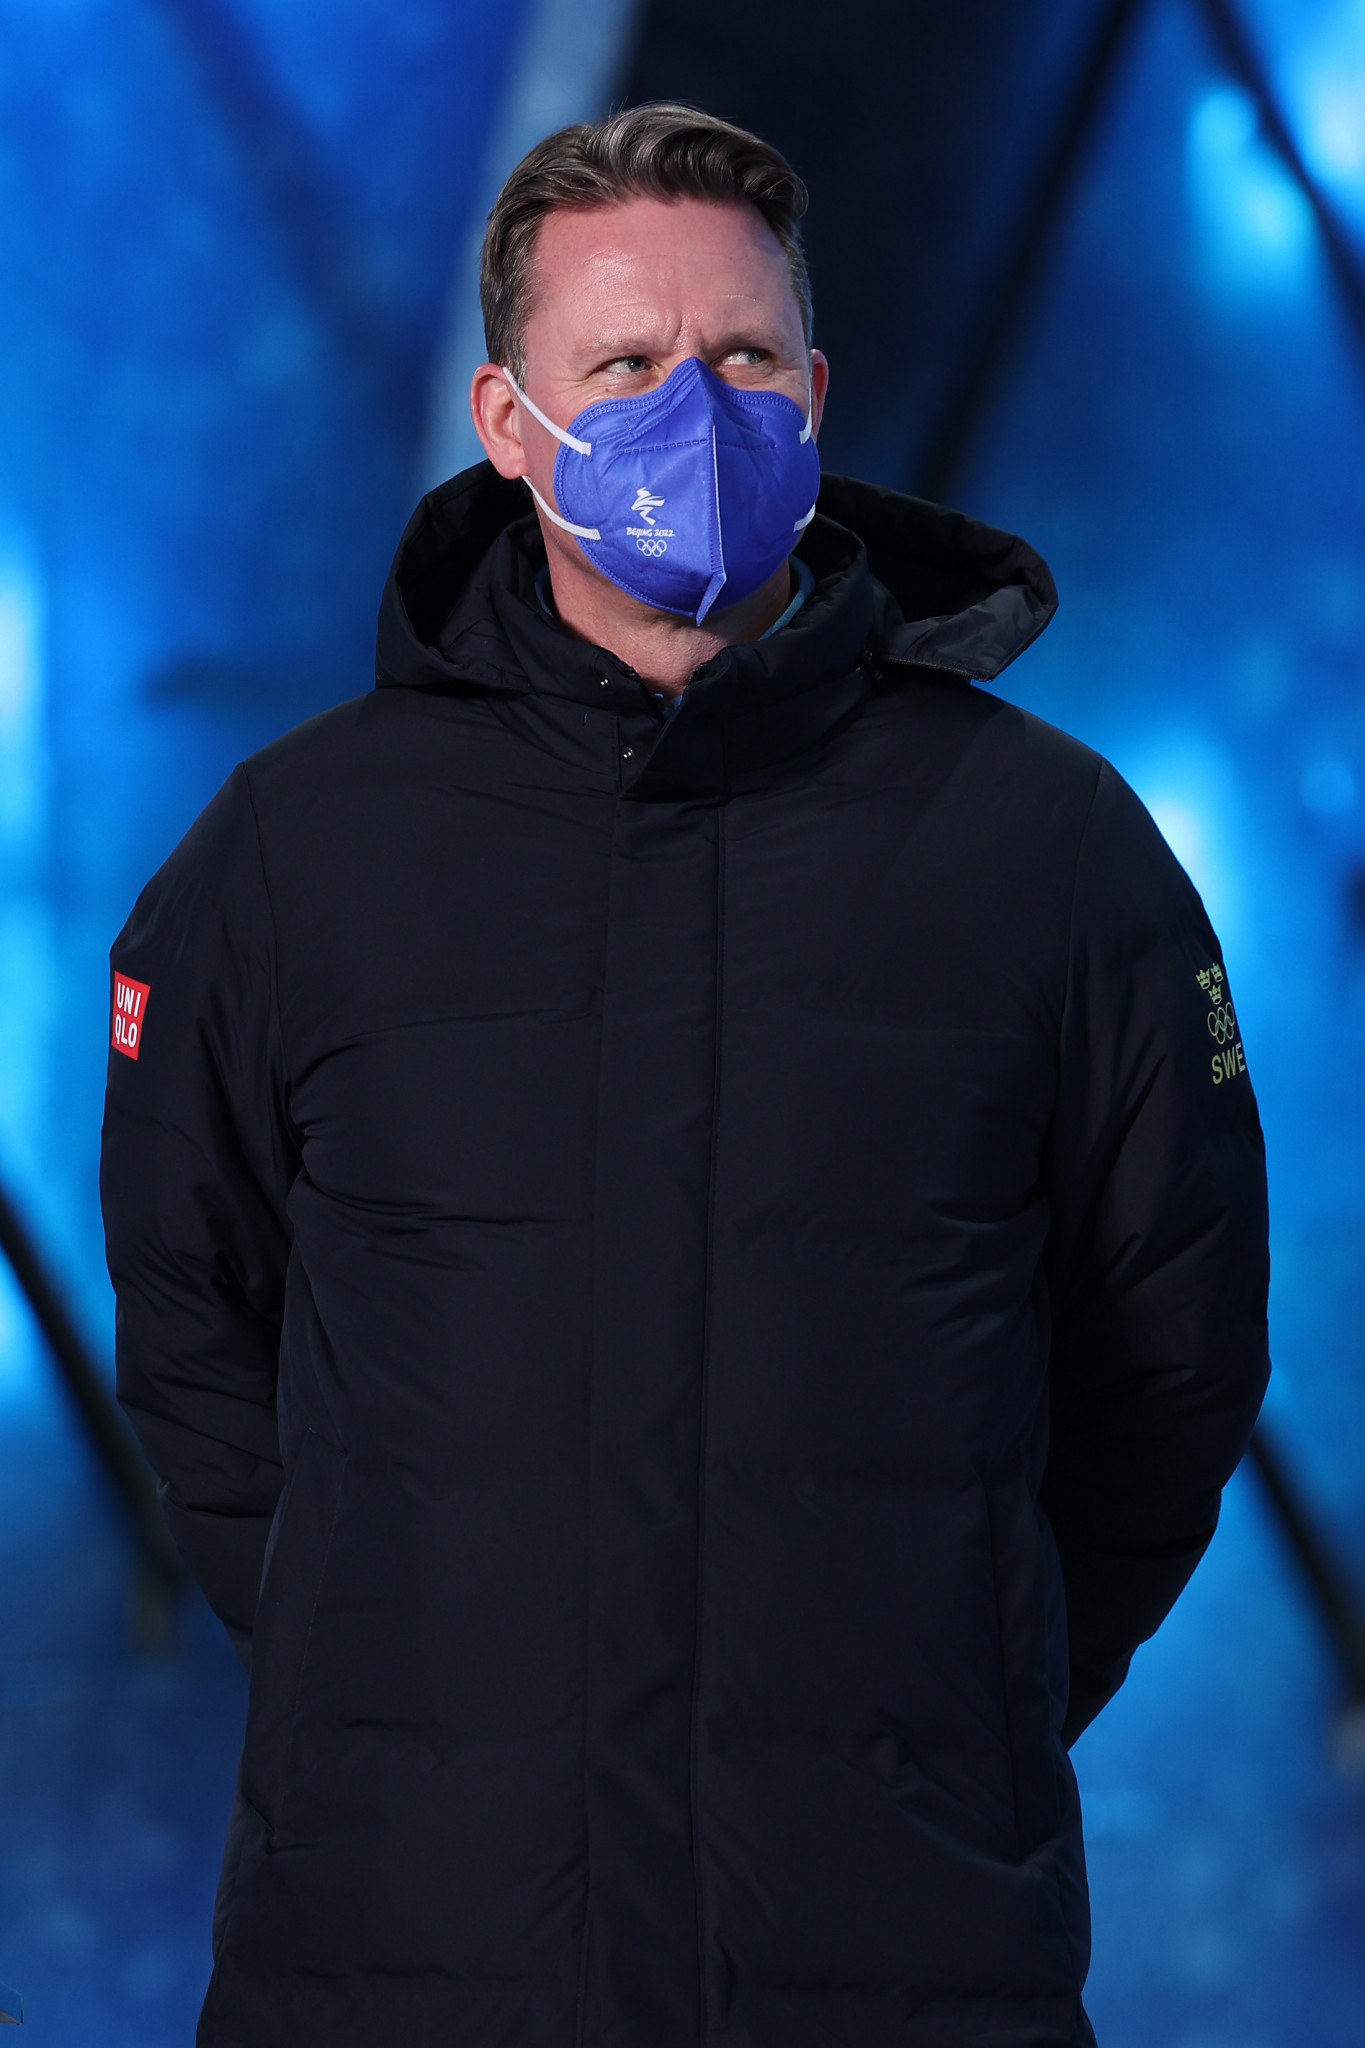 Mats Årjes, pictured here during the Beijing 2022 Winter Olympics, has stood down from the FIS Council until further notice ©Getty Images